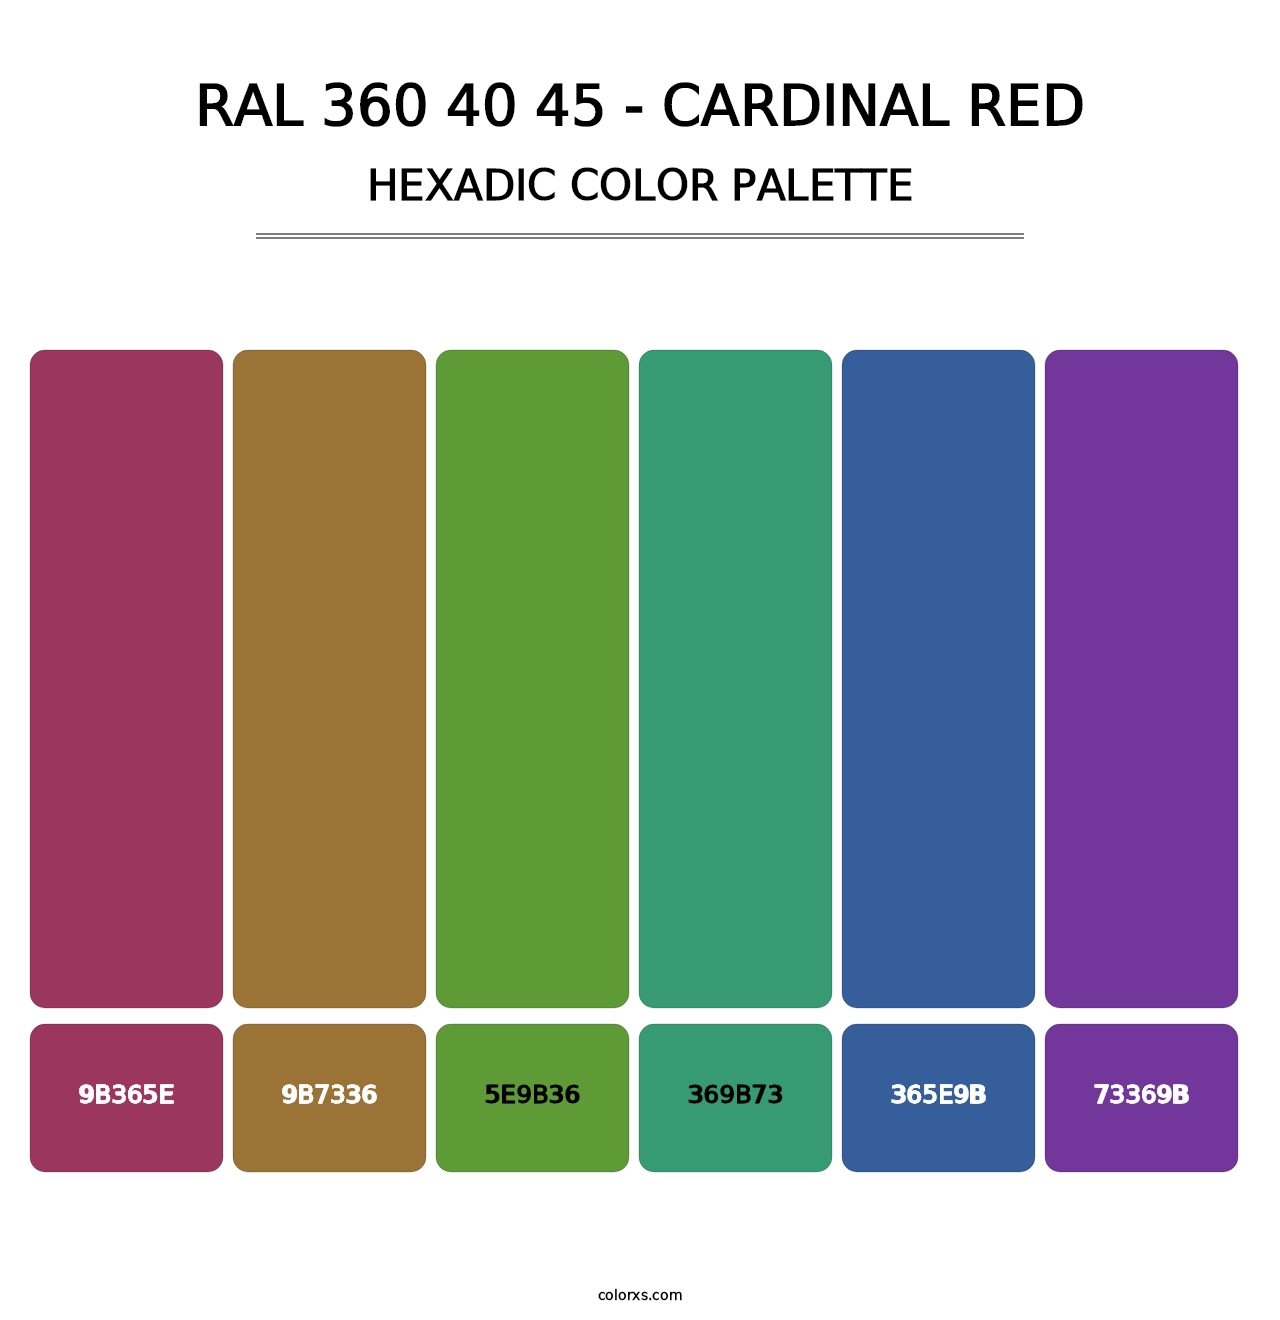 RAL 360 40 45 - Cardinal Red - Hexadic Color Palette